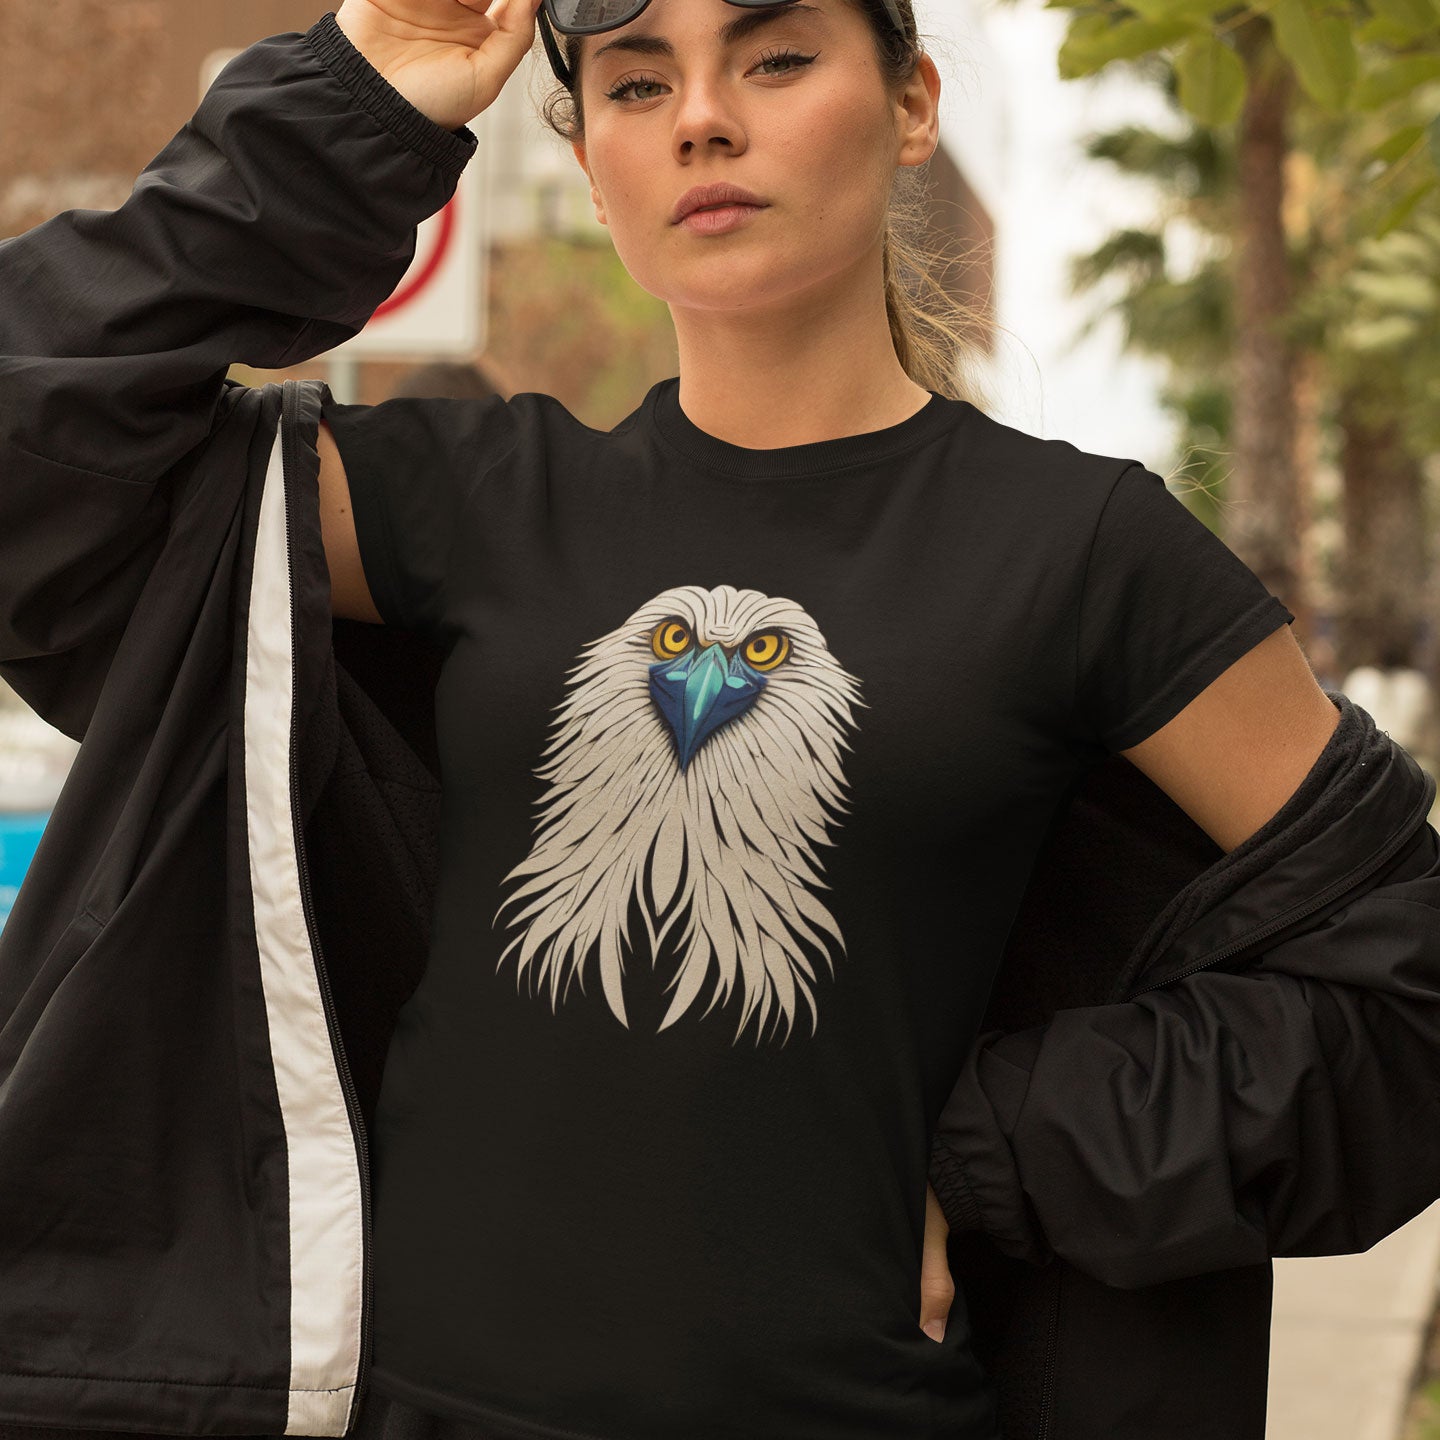 woman wearing a black t-shirt with an eagle print